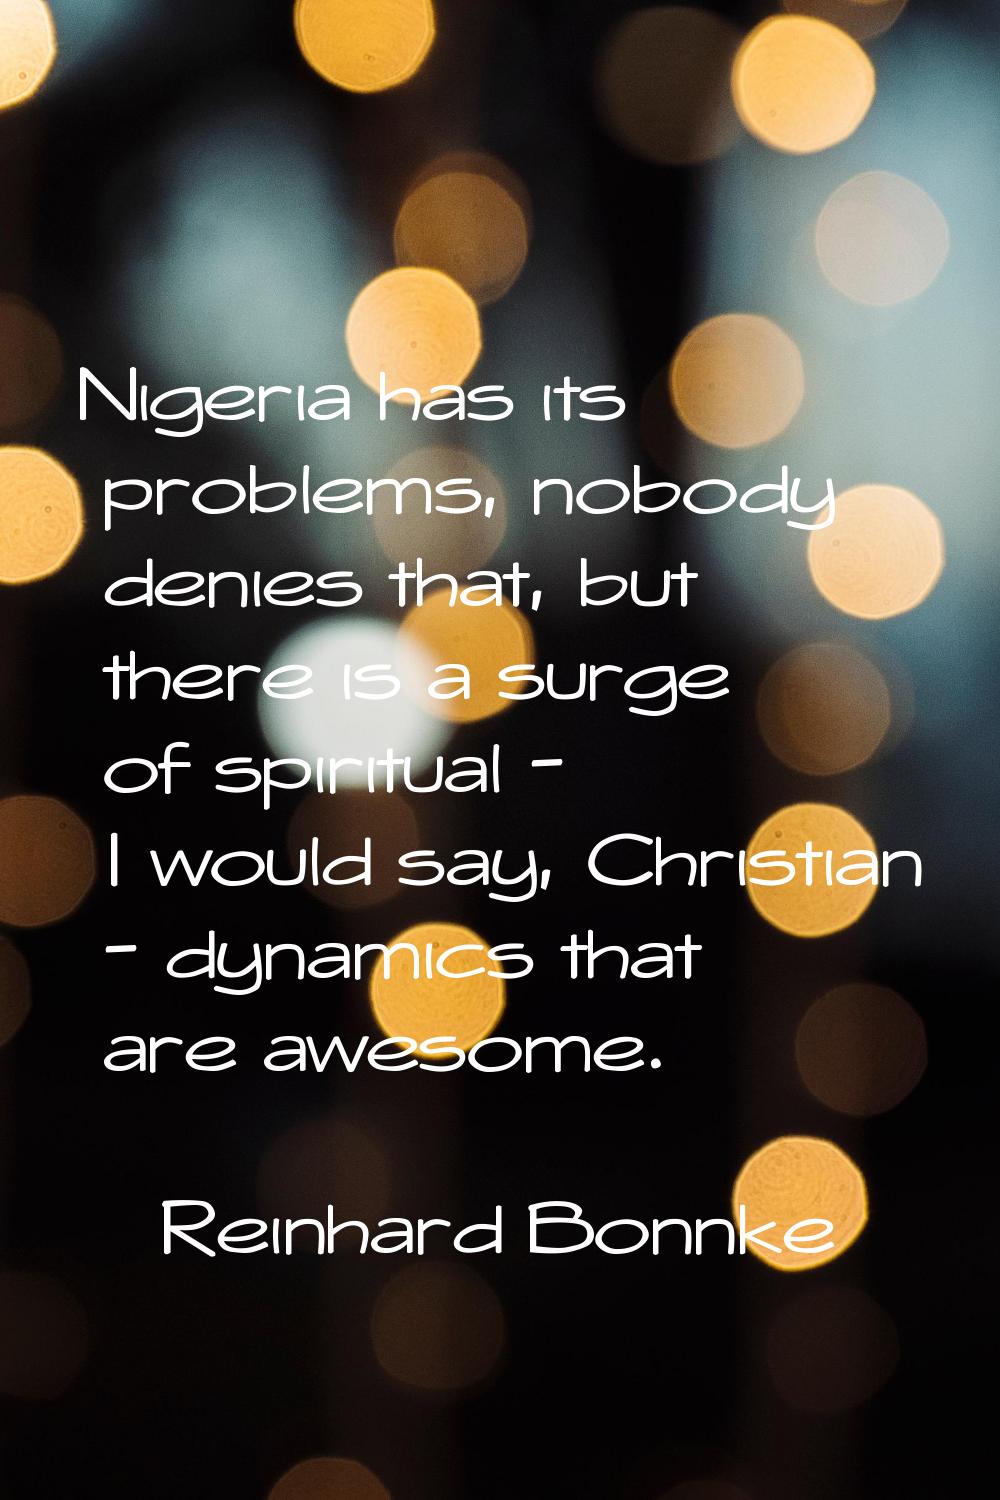 Nigeria has its problems, nobody denies that, but there is a surge of spiritual - I would say, Chri